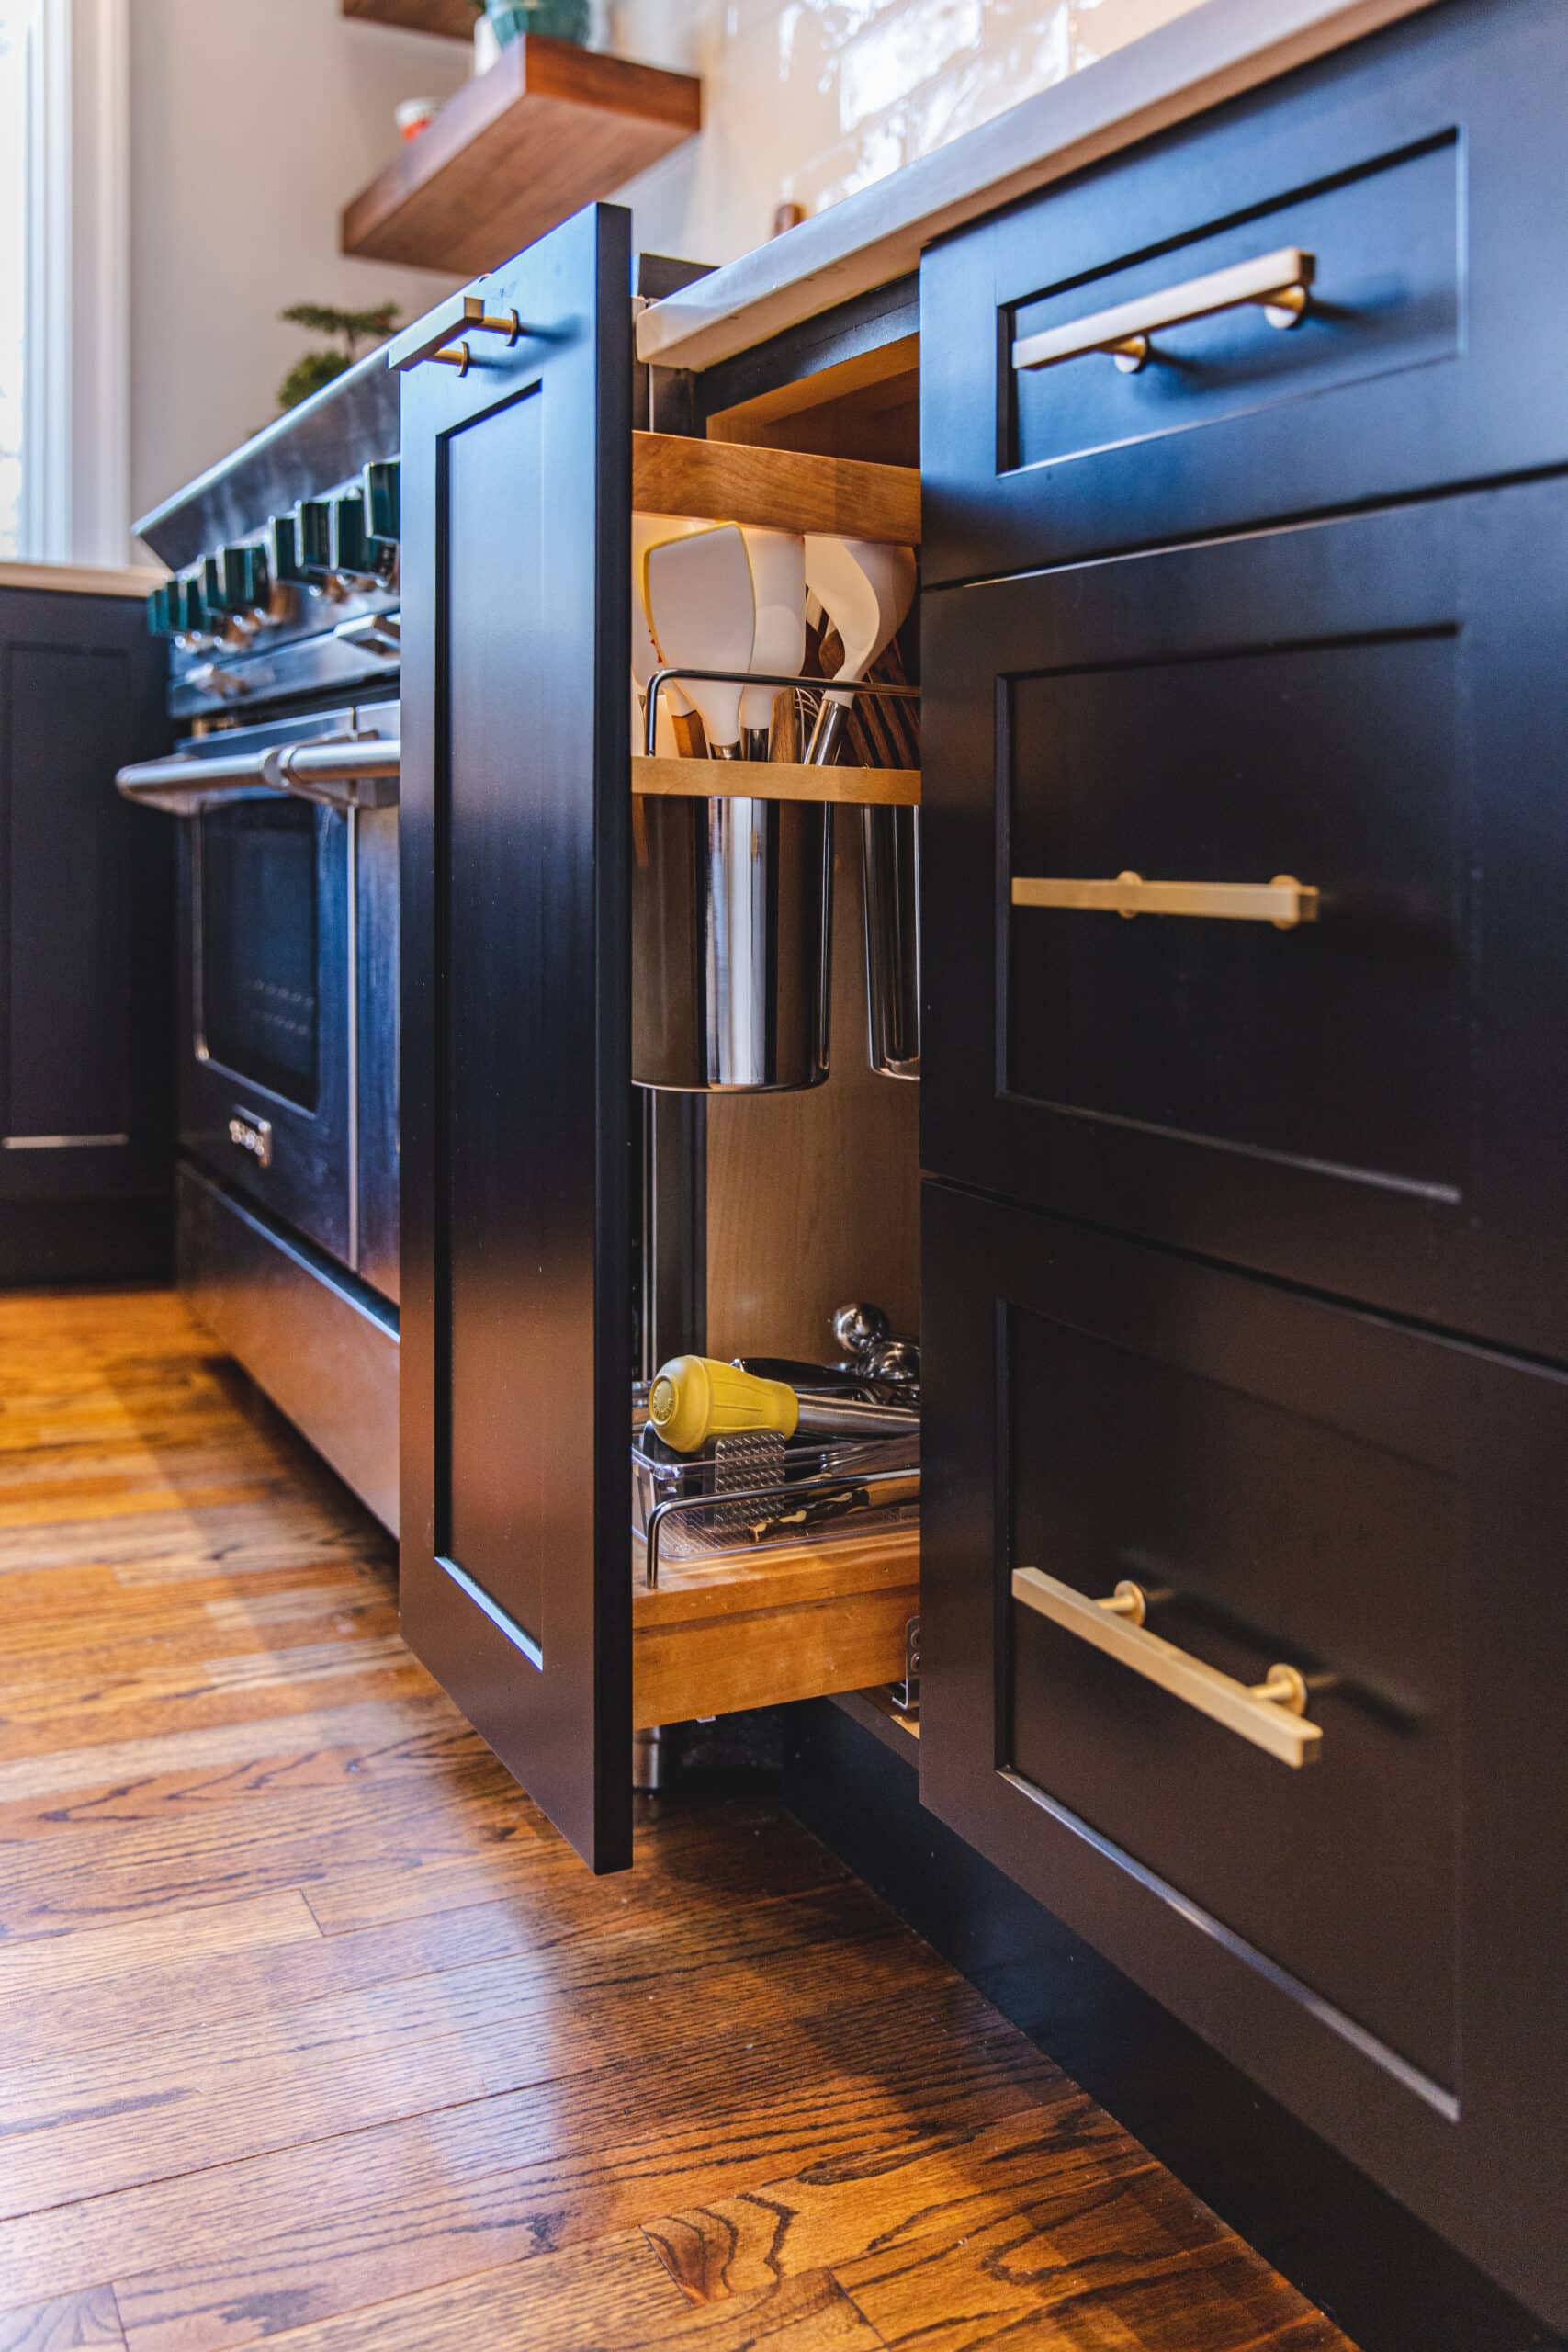 A kitchen with sleek black cabinets and warm wooden floors